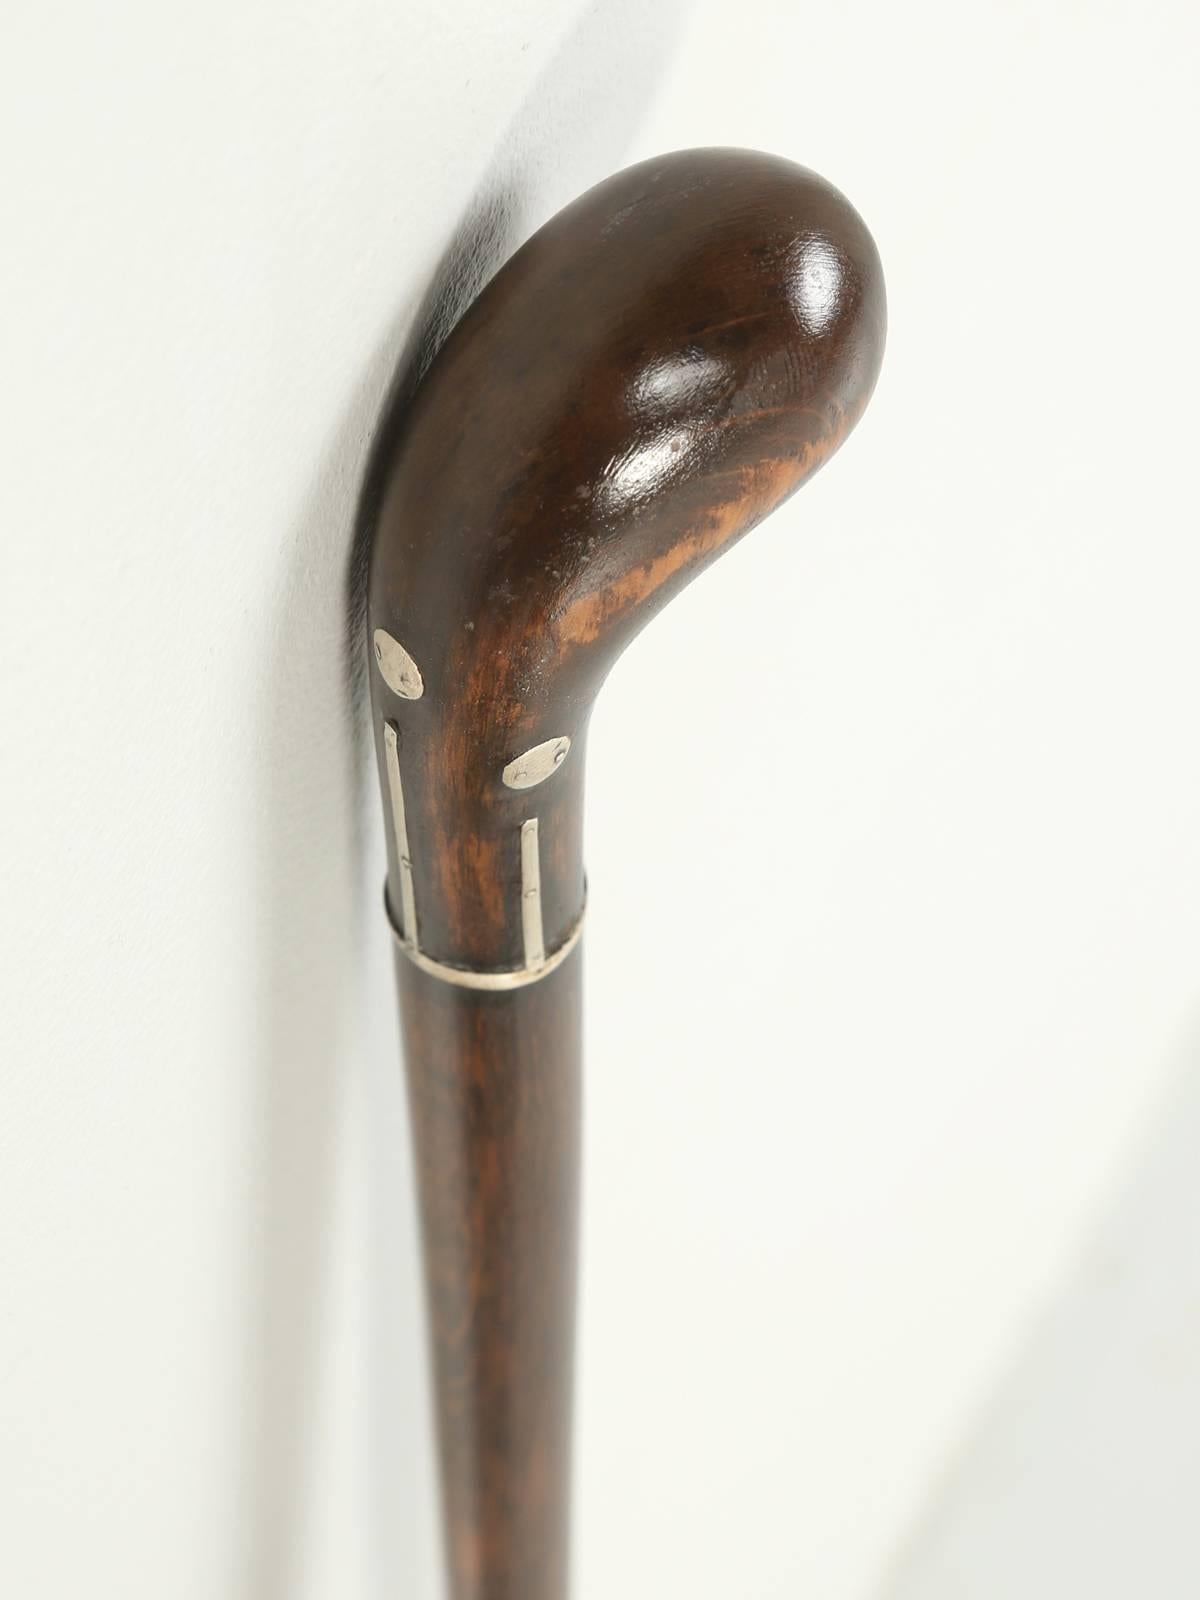 Antique French walking stick or cane, with beautiful silver inlays. Our old plank finishing department, refinished the wood shaft and polished the silver inlays and present a nice contrast between the dark wood and the silver. No prior repairs.